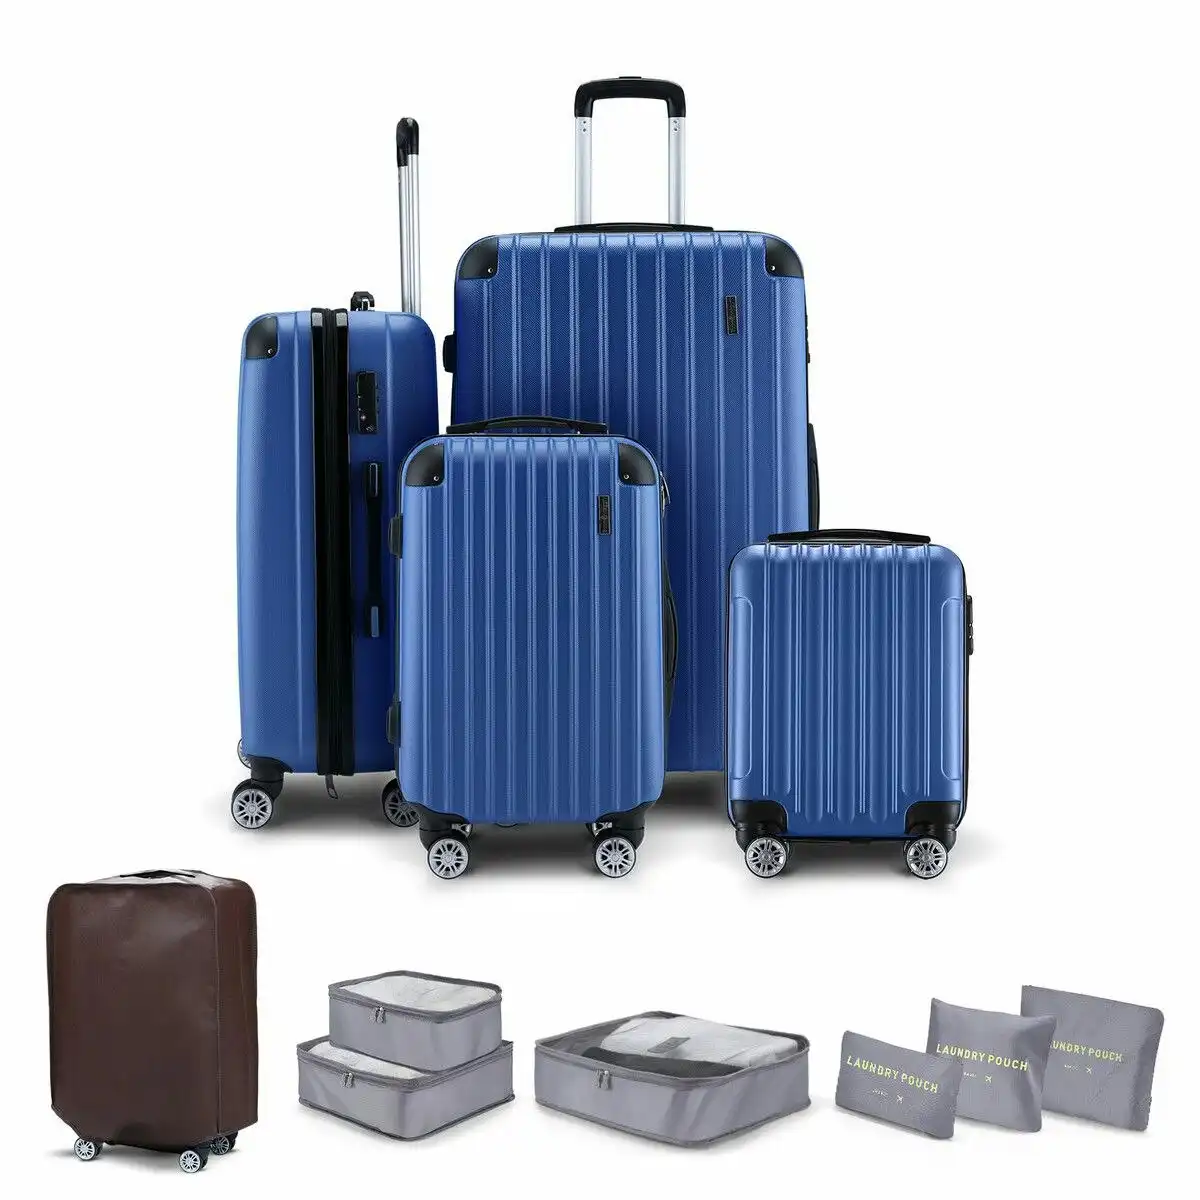 Buon Viaggio 4 Piece Suitcase Set Carry On Luggage Traveller Bag Hard Shell TSA Lock Checked Trolley Rolling Lightweight Blue